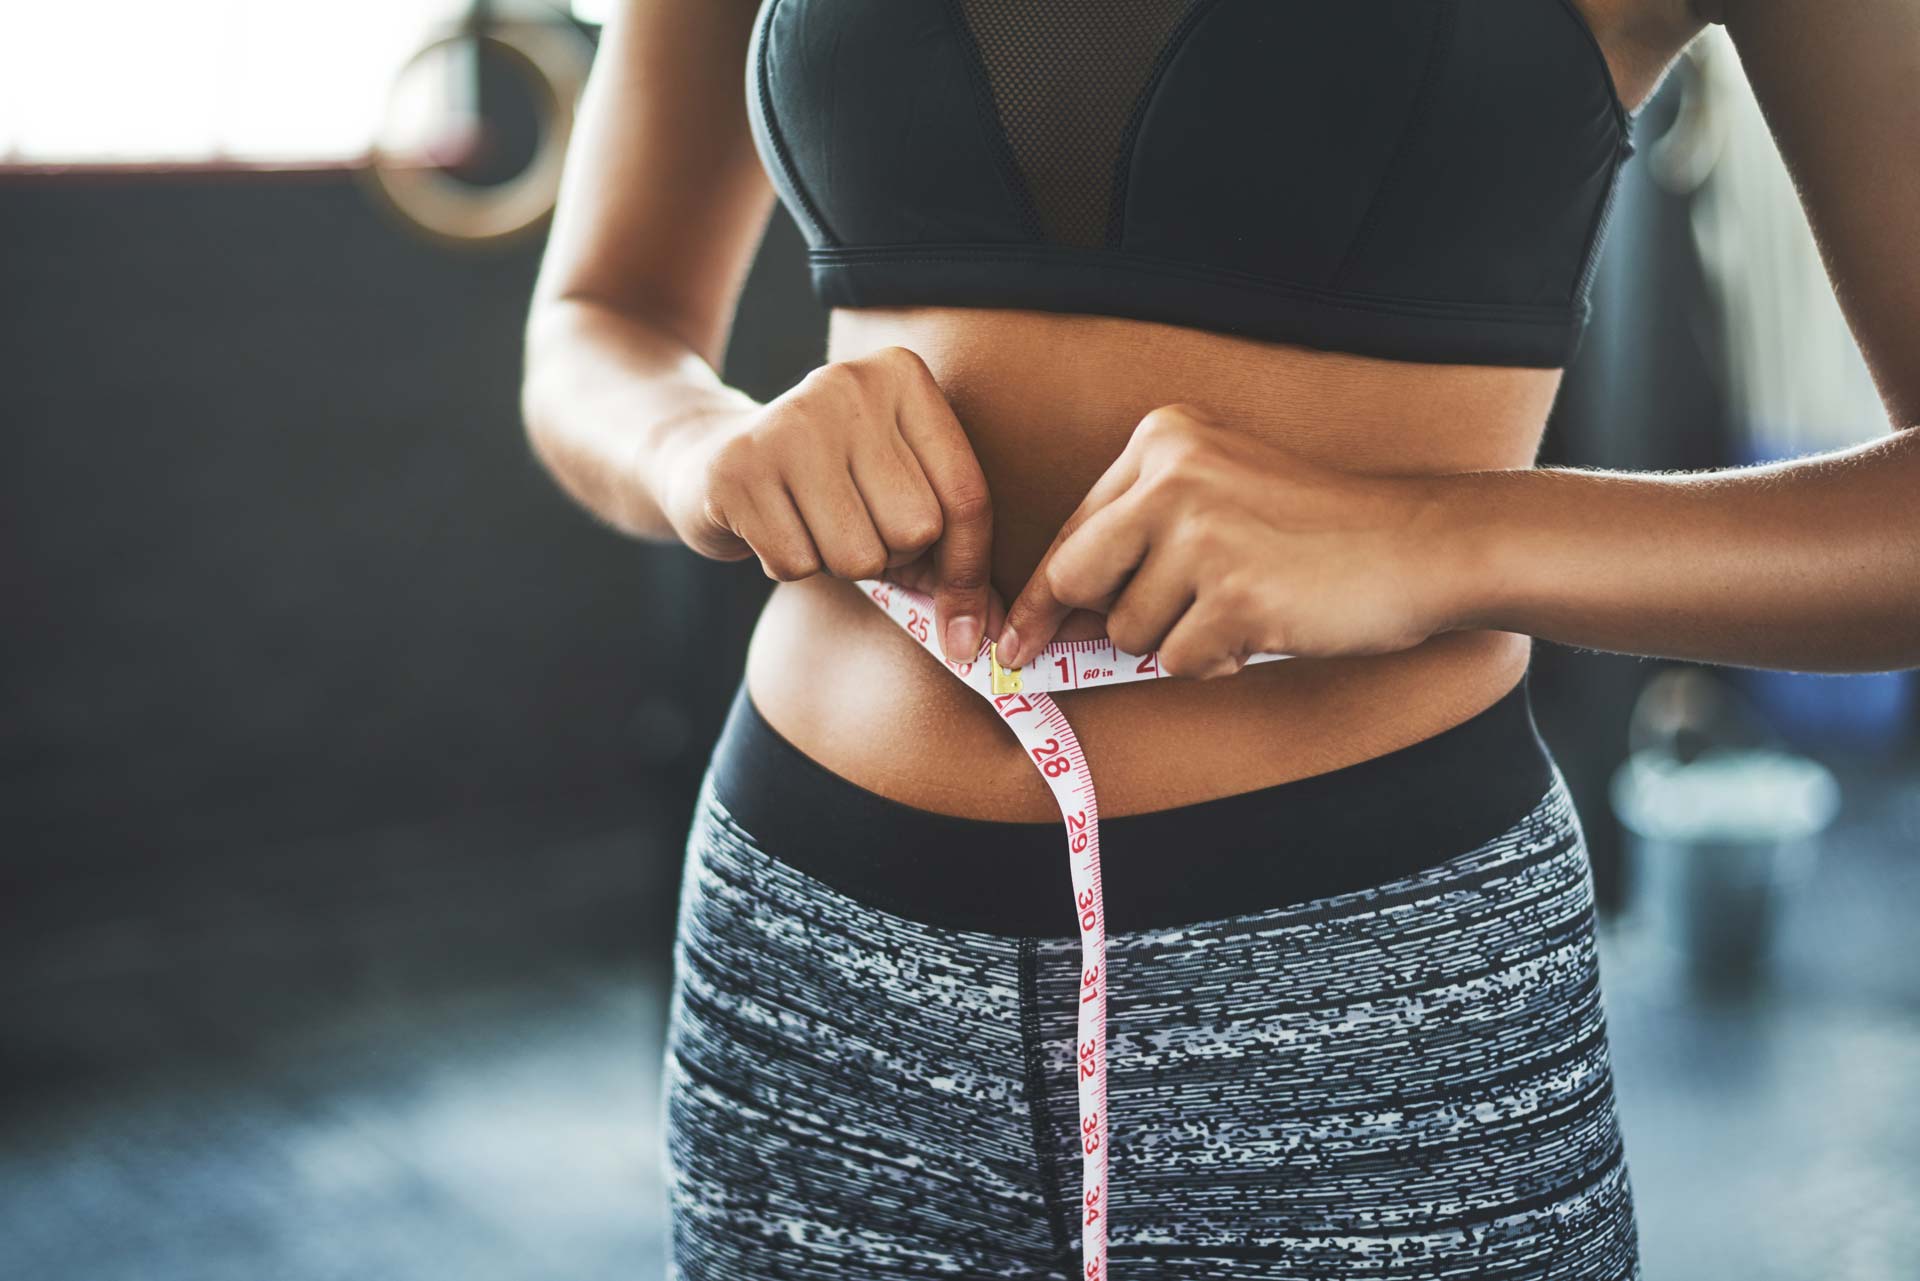 6 Reasons Why Non-surgical Body Sculpting May Be Right for You